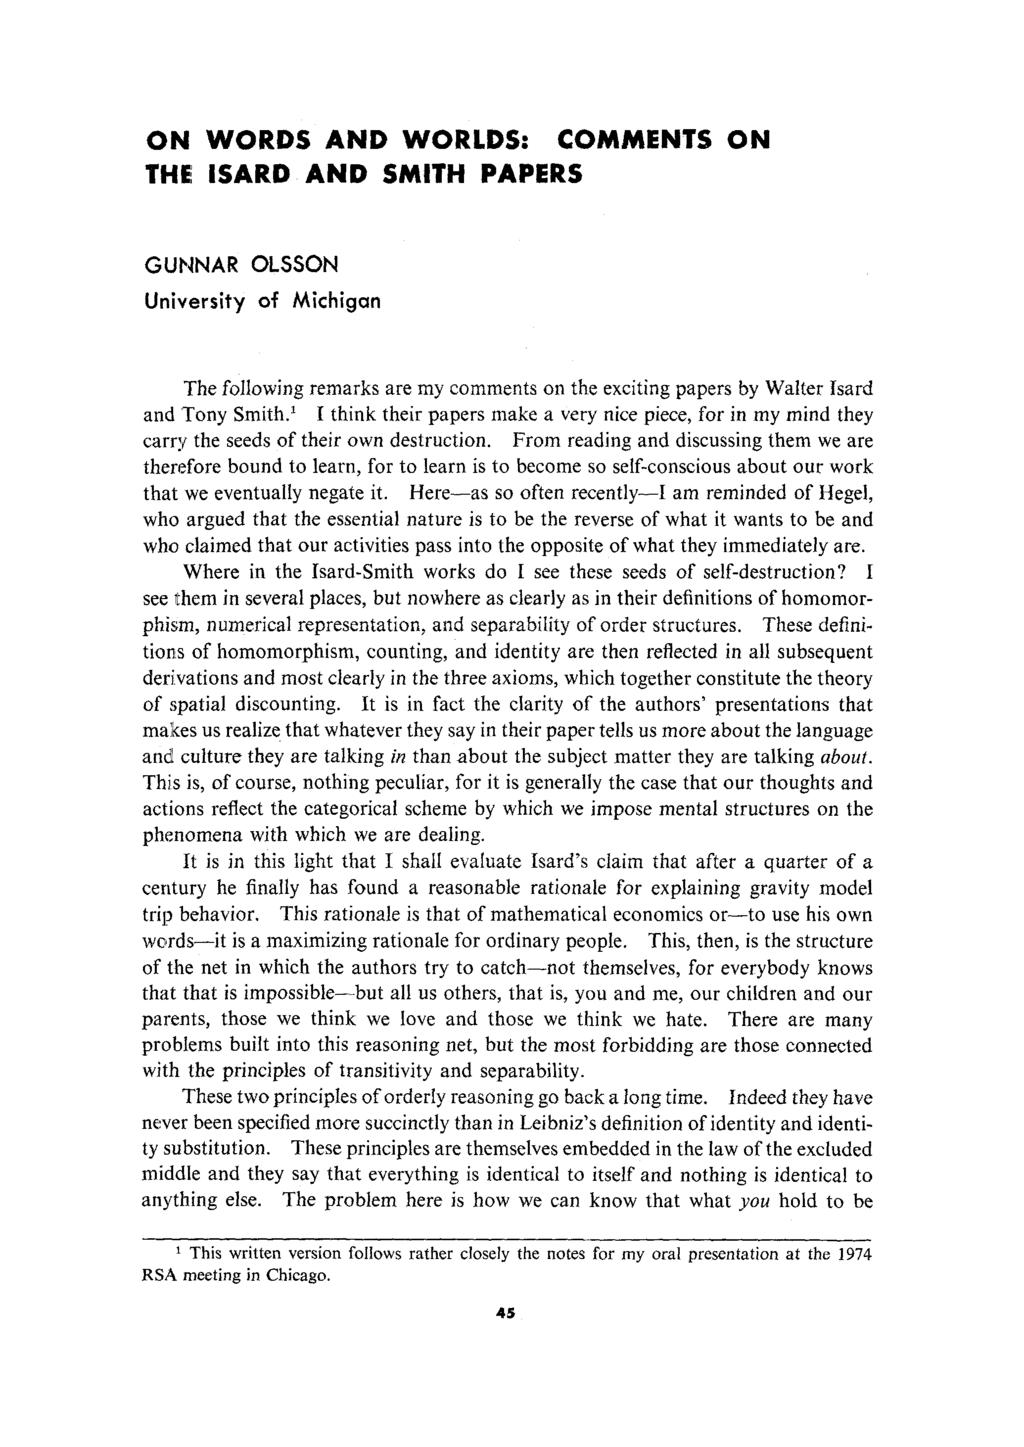 ON WORDS AND WORLDS: COMMENTS ON THE ISARD AND SMITH PAPERS GUNNAR OLSSON University of Michigan The following remarks are my comments on the exciting papers by Walter Isard and 'Tony Smith2 I think